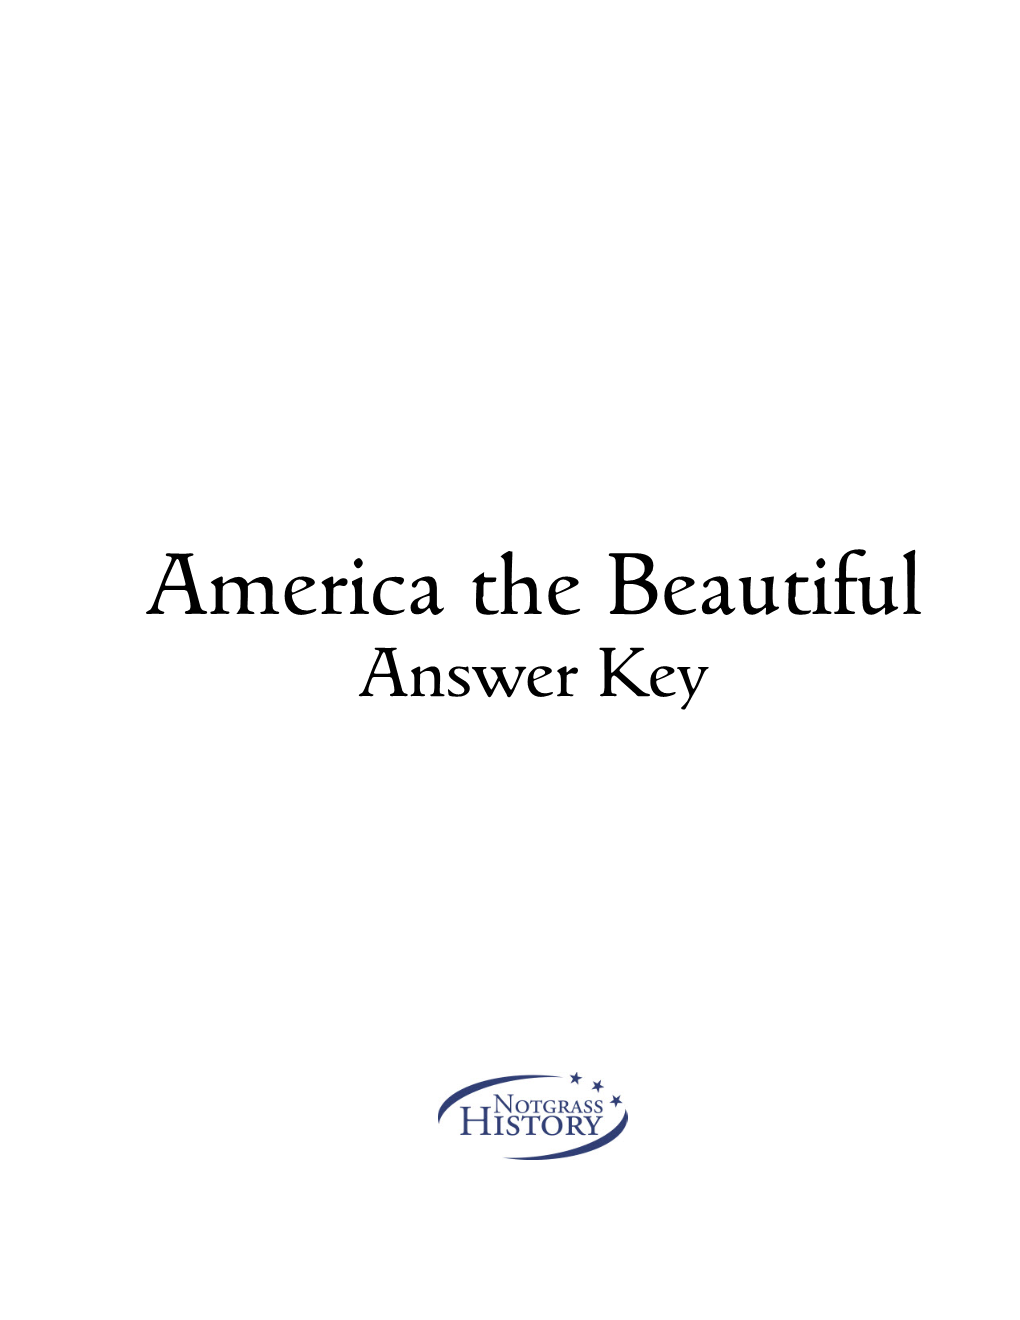 America the Beautiful, Student Workbook, Lesson Review, and the Vocabularly Assignments at the End of the Lessons